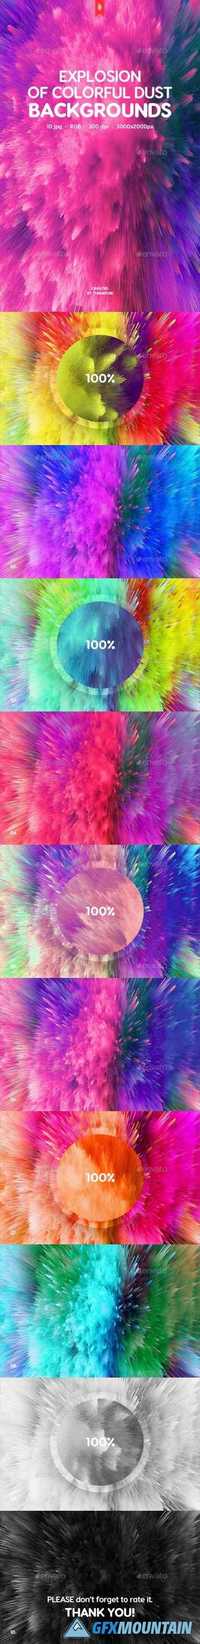 Explosion of Colorful Dust Backgrounds 20234705